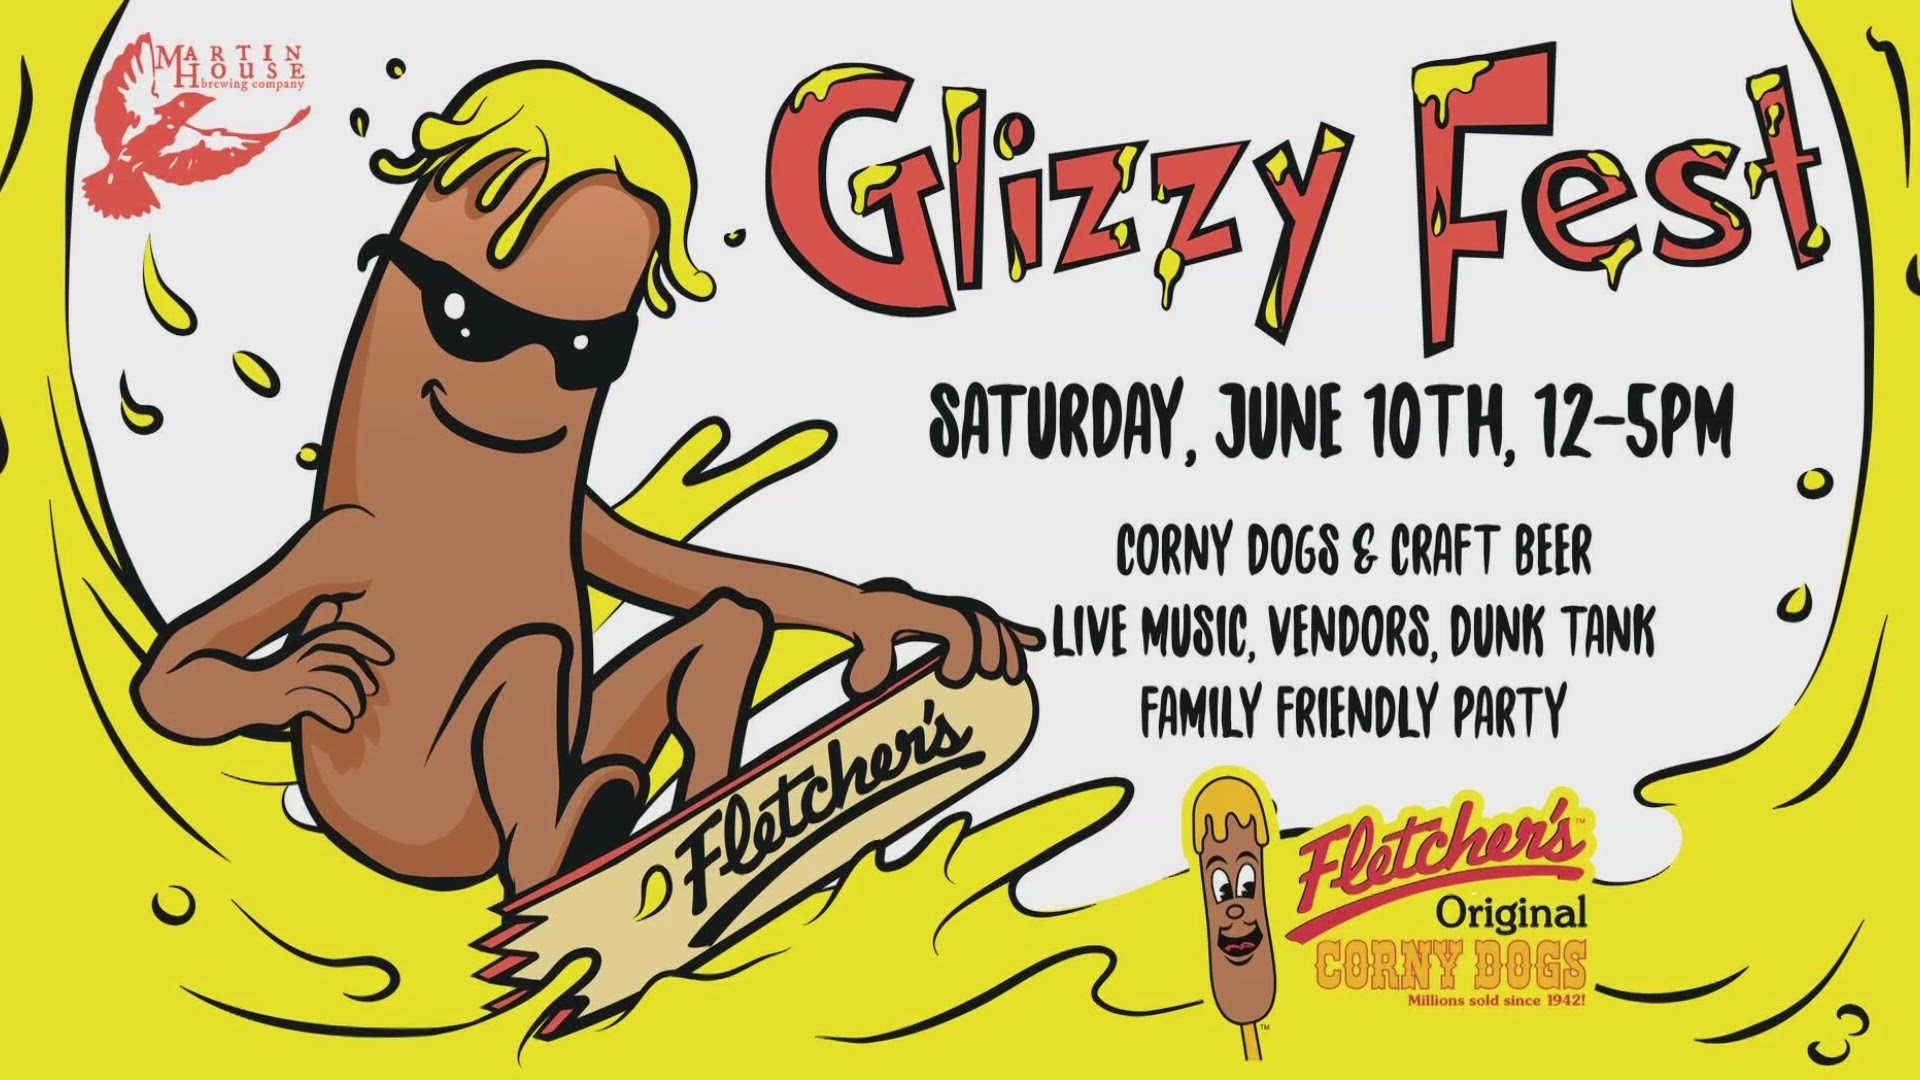 Fletcher's Corny Dogs is partnering with Martin House Brewing Company to bring the one-of-a-kind offering at its annual Glizzy Fest.